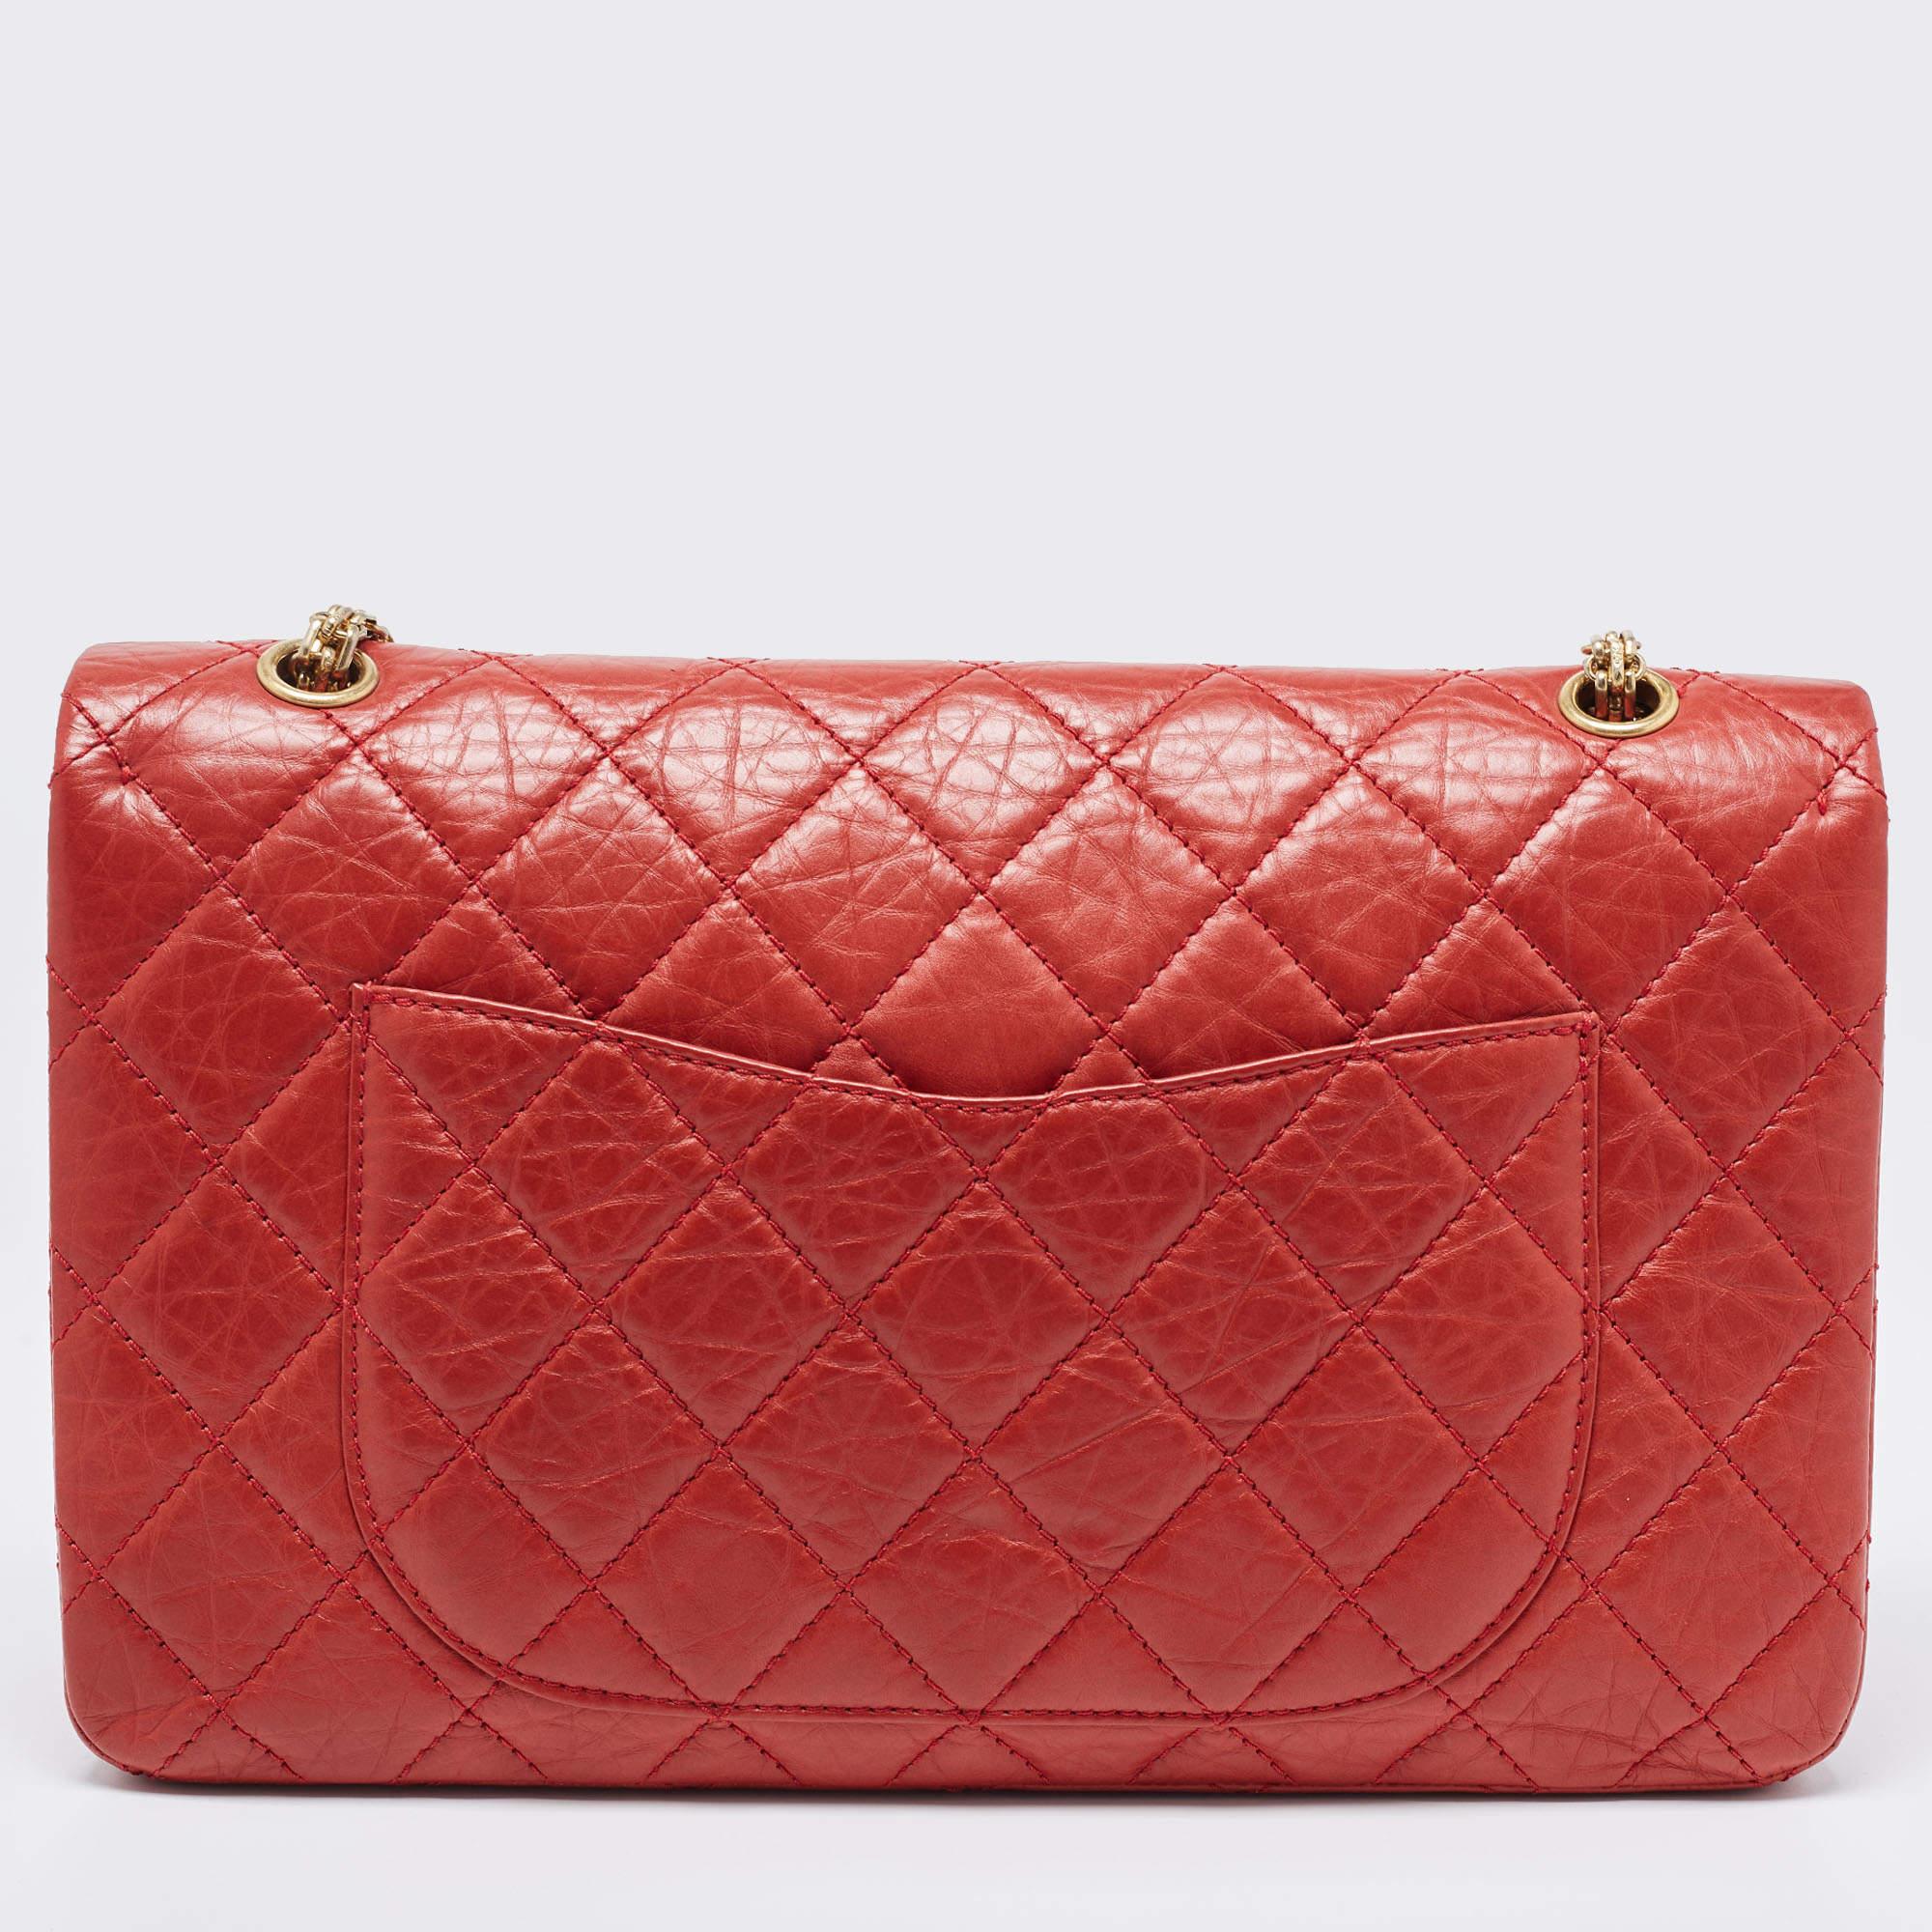 Chanel Red Quilted Aged Leather Reissue 2.55 Classic 227 Flap Bag For Sale 2